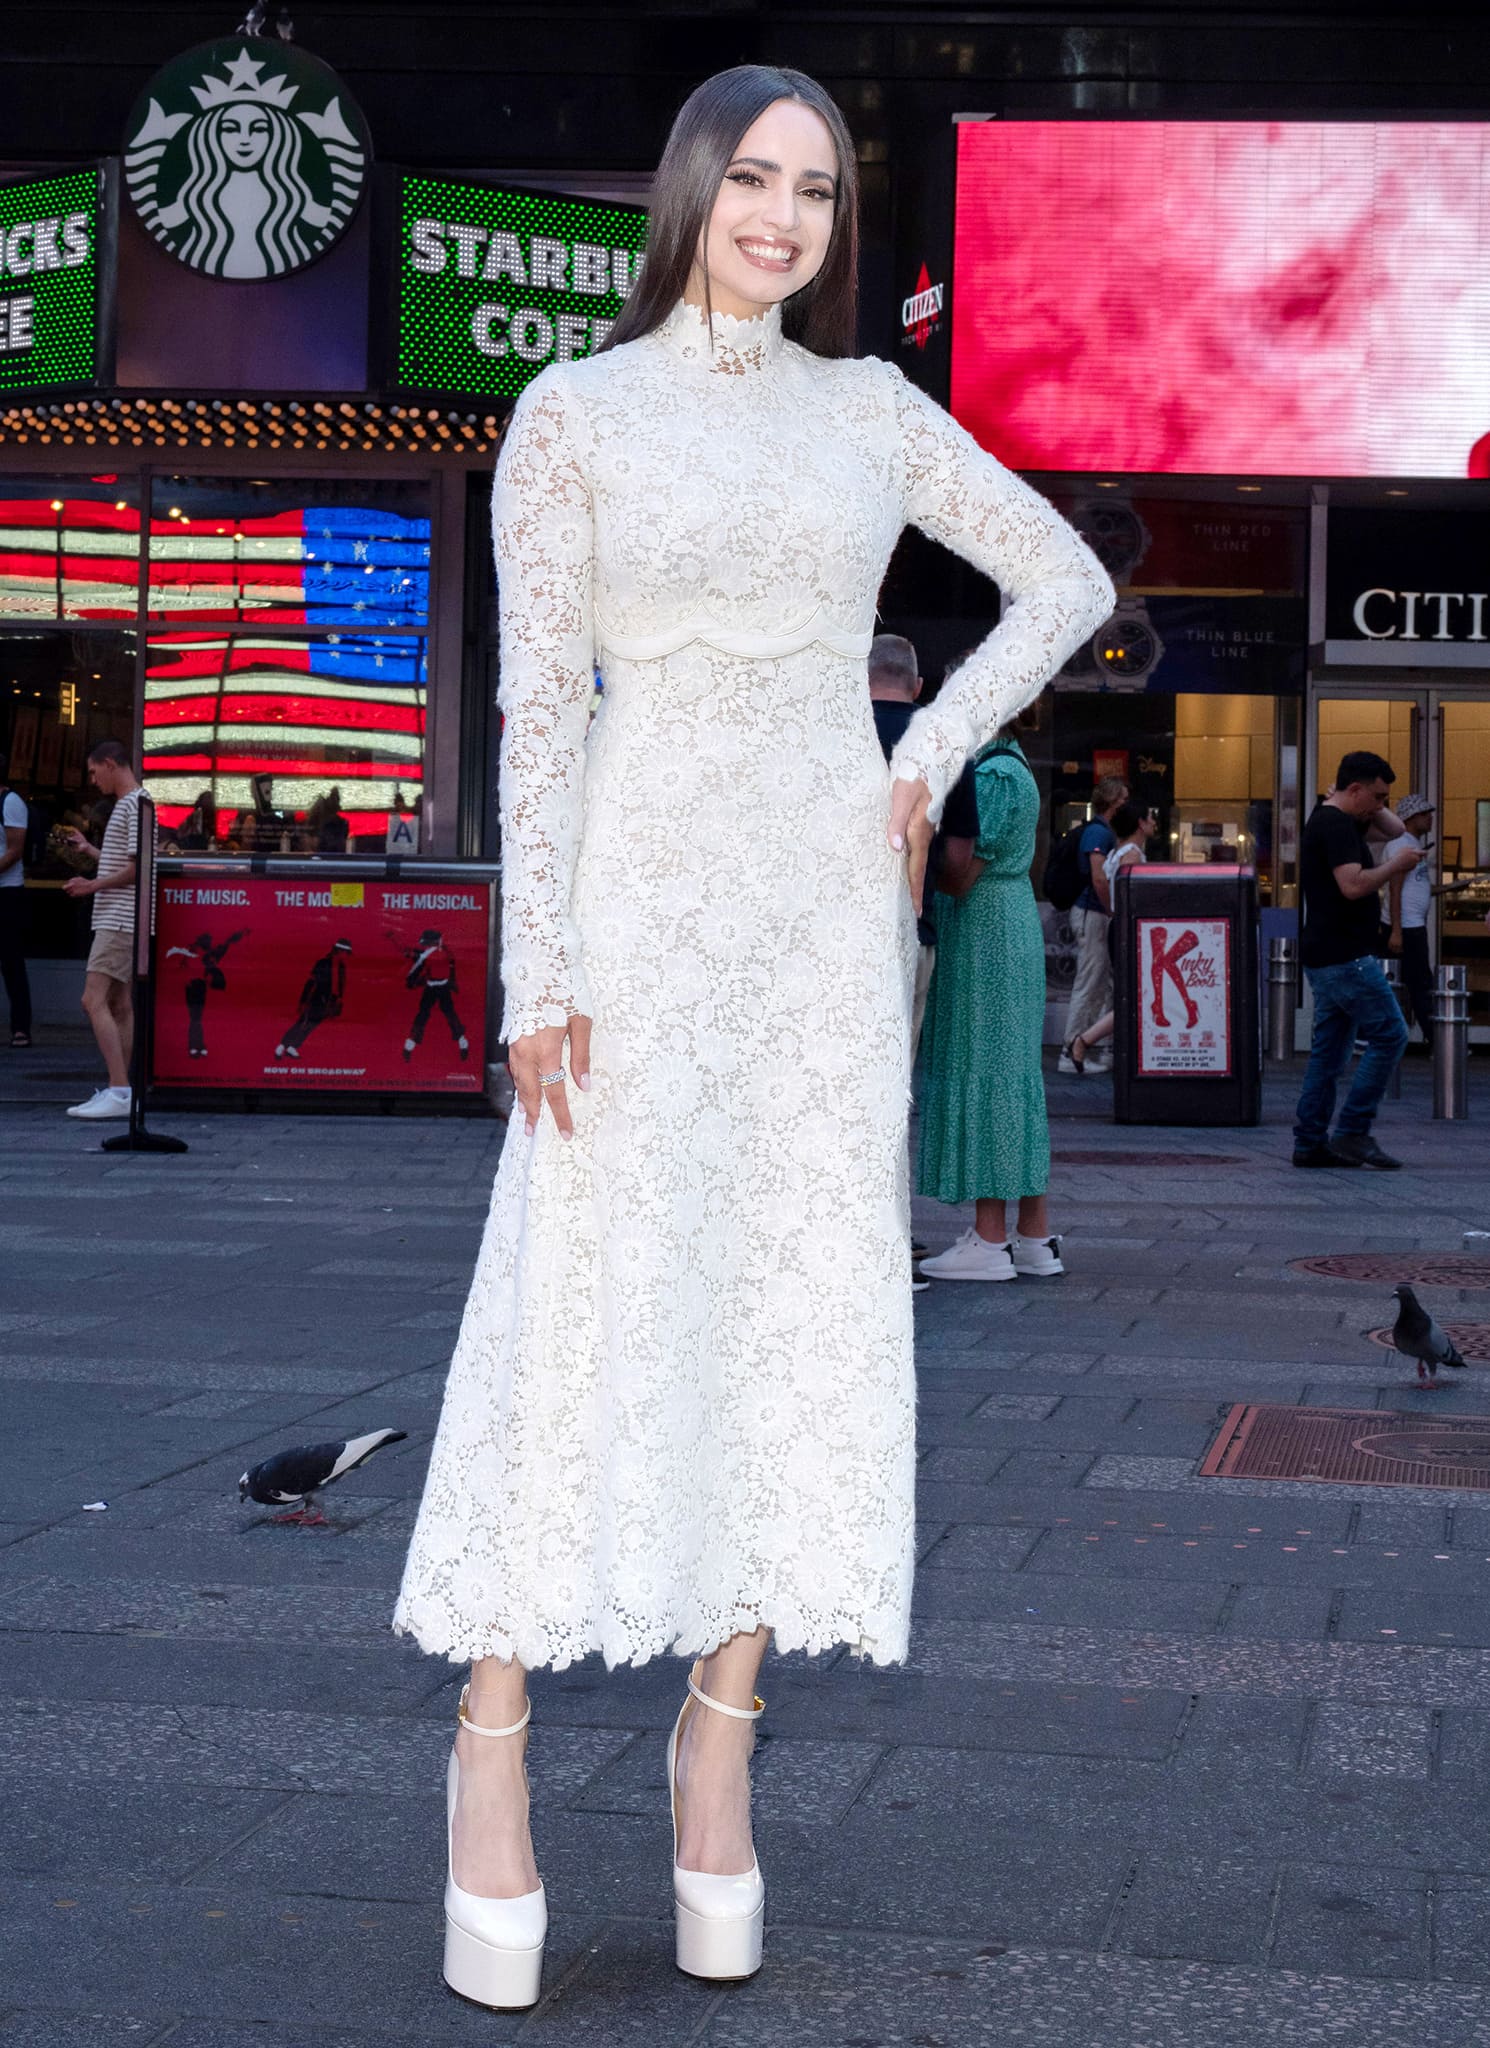 Sofia Carson looks elegant in a white lace Giambattista Valli dress for her debut appearance on The Tonight Show Starring Jimmy Fallon on August 8, 2022